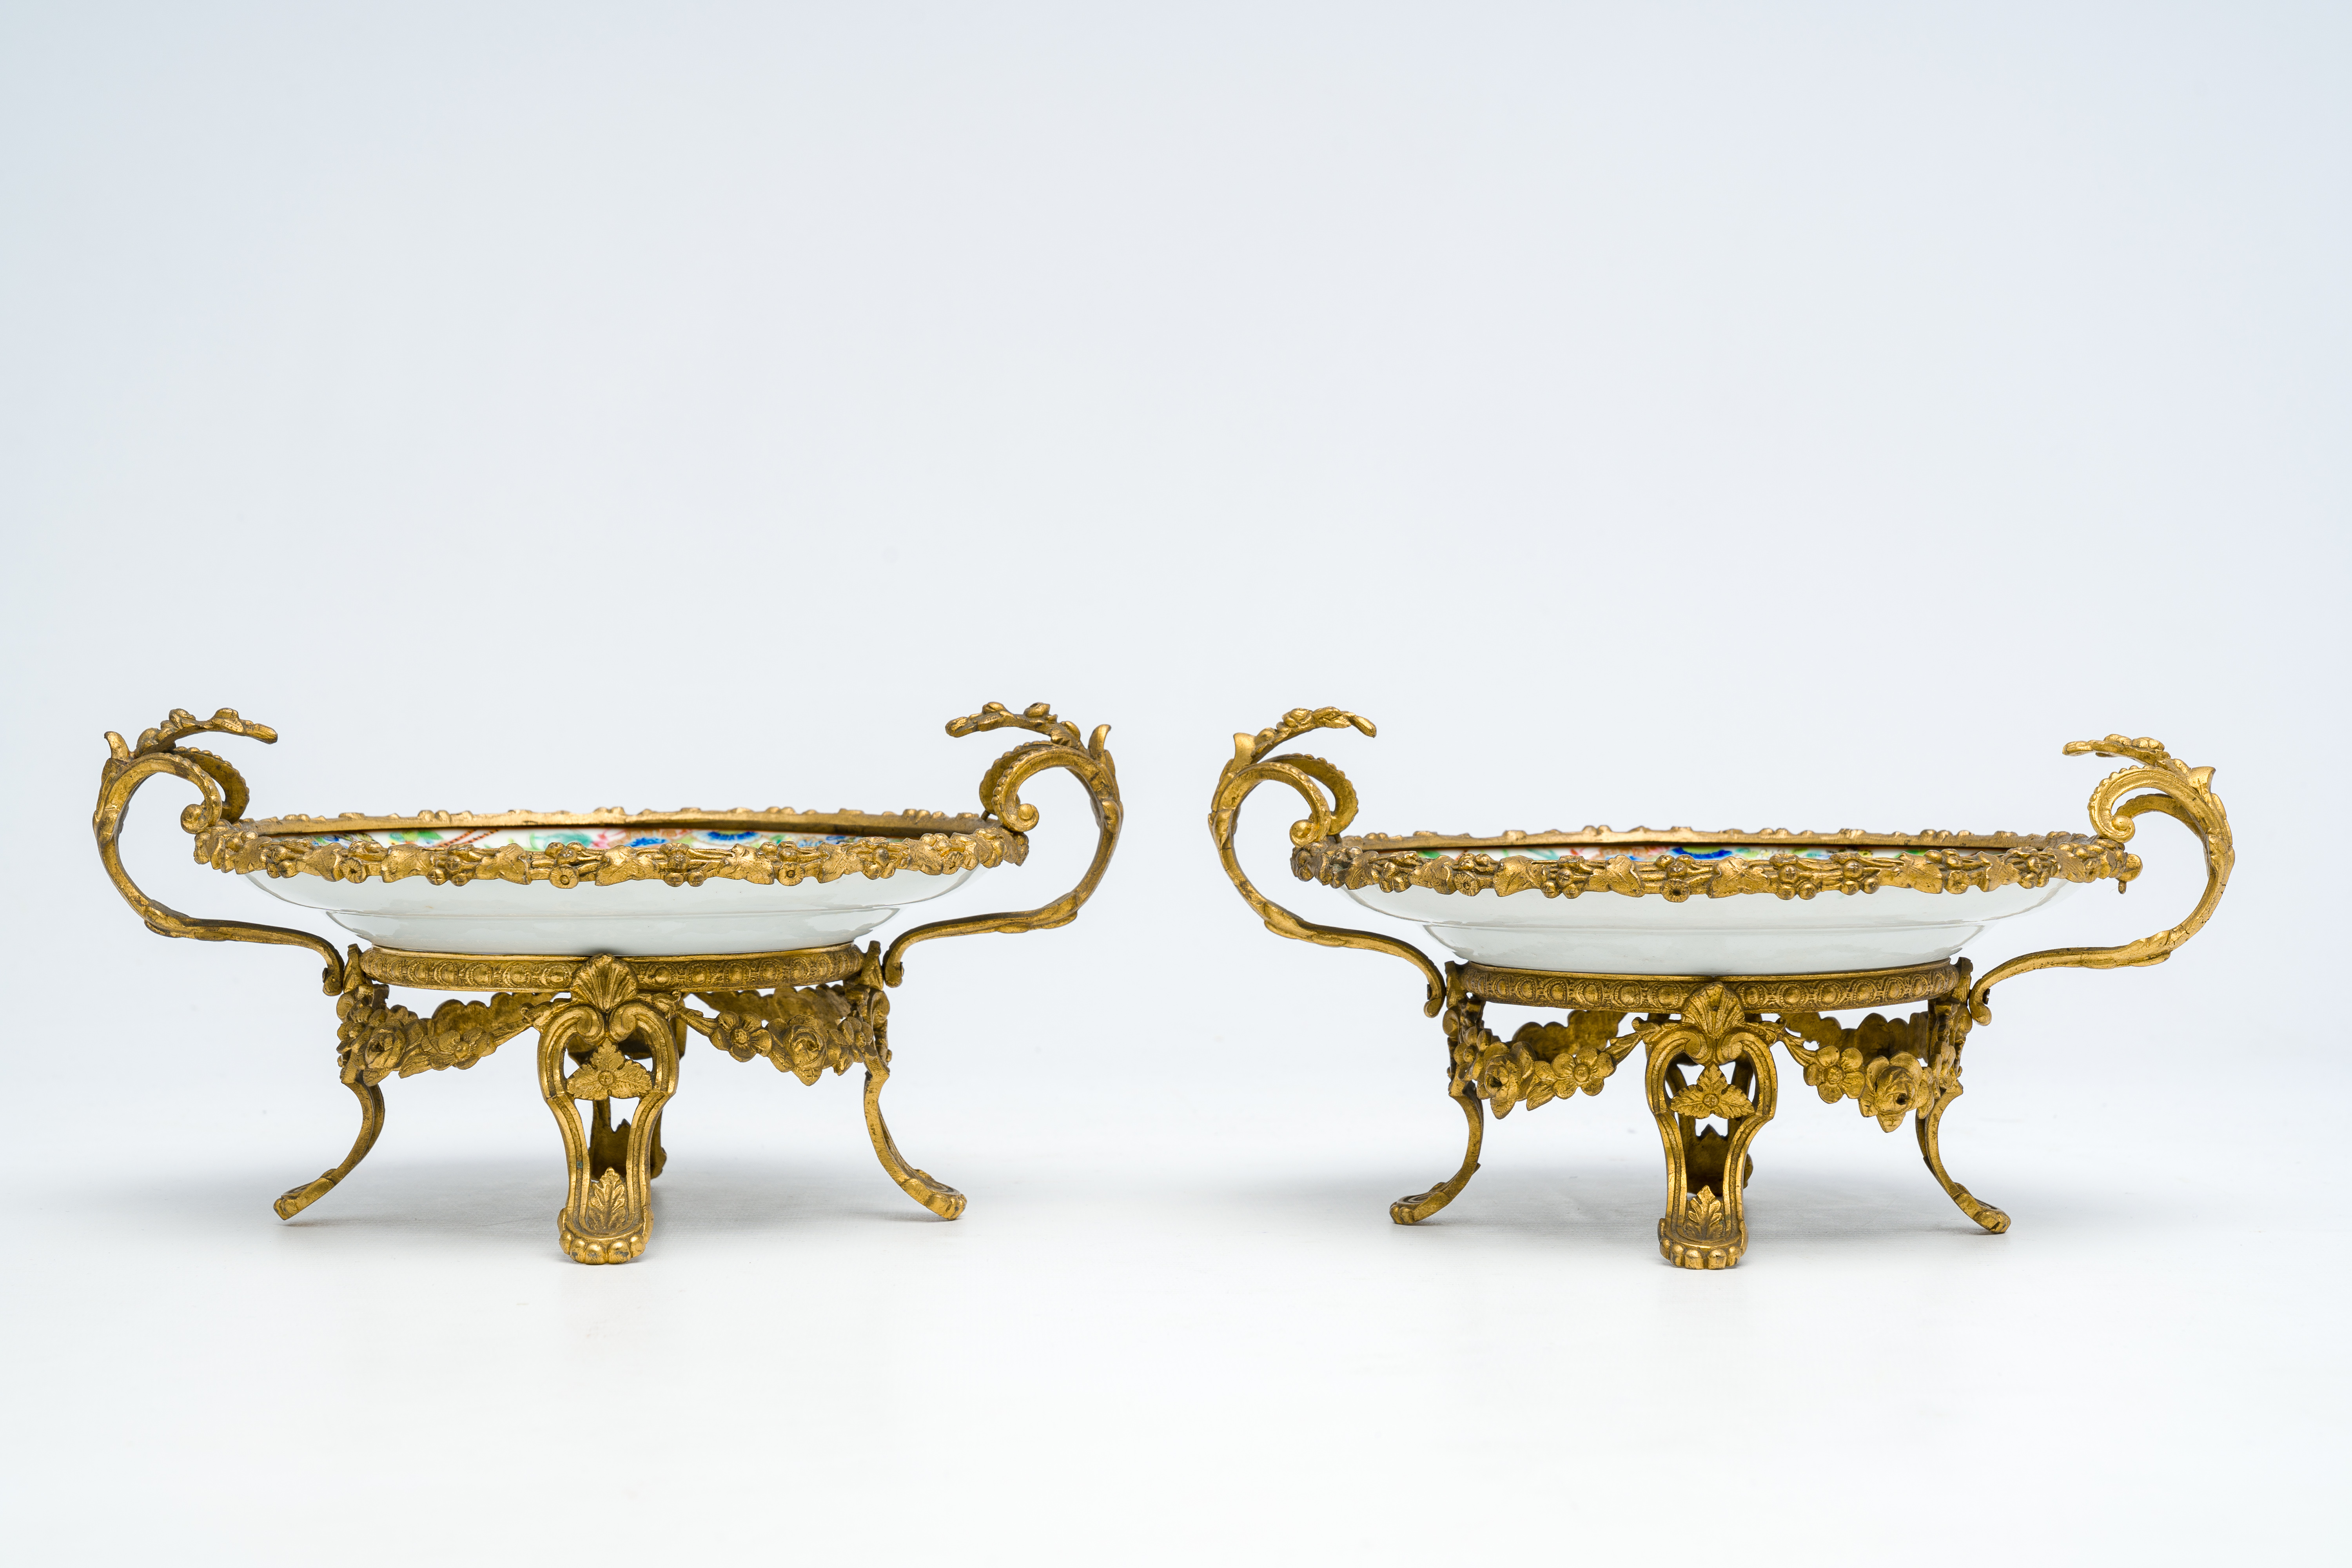 Two Chinese Canton famille rose gilt bronze mounted plates with figures on a terrace, 19th C. - Image 4 of 7